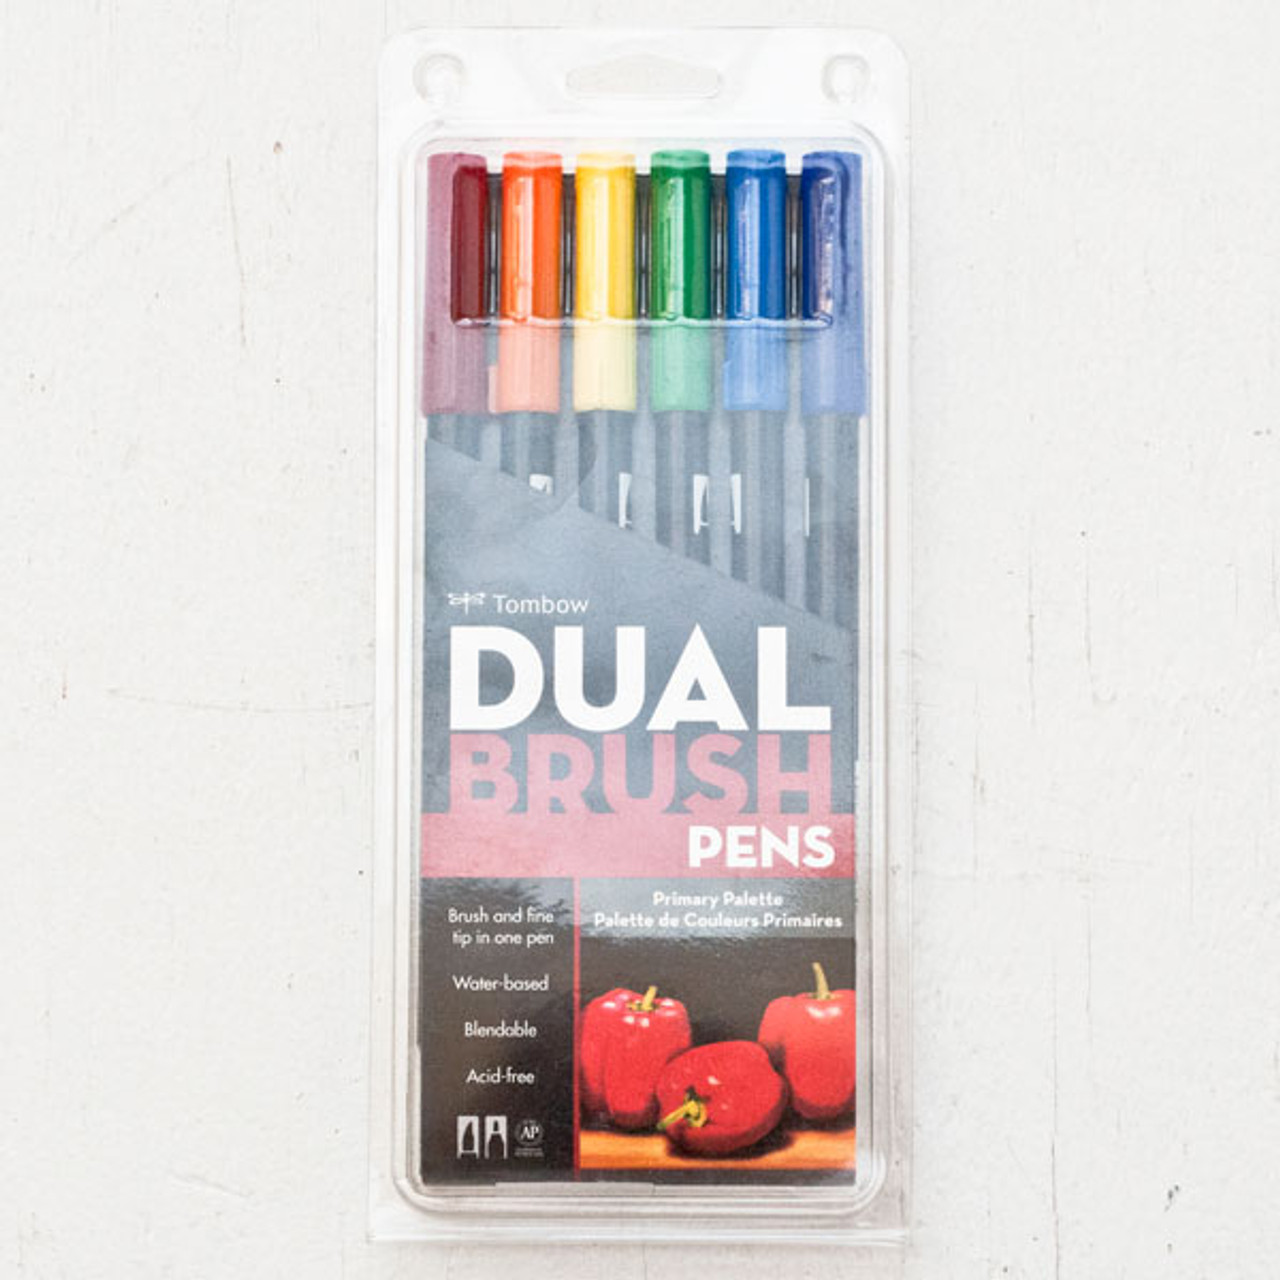 https://cdn11.bigcommerce.com/s-87od2q0wh1/images/stencil/1280x1280/products/9329/24261/5TOM-56162_2-Tombow-Dual-Brush-Pen-Set-Primary__08041.1574705650.jpg?c=2